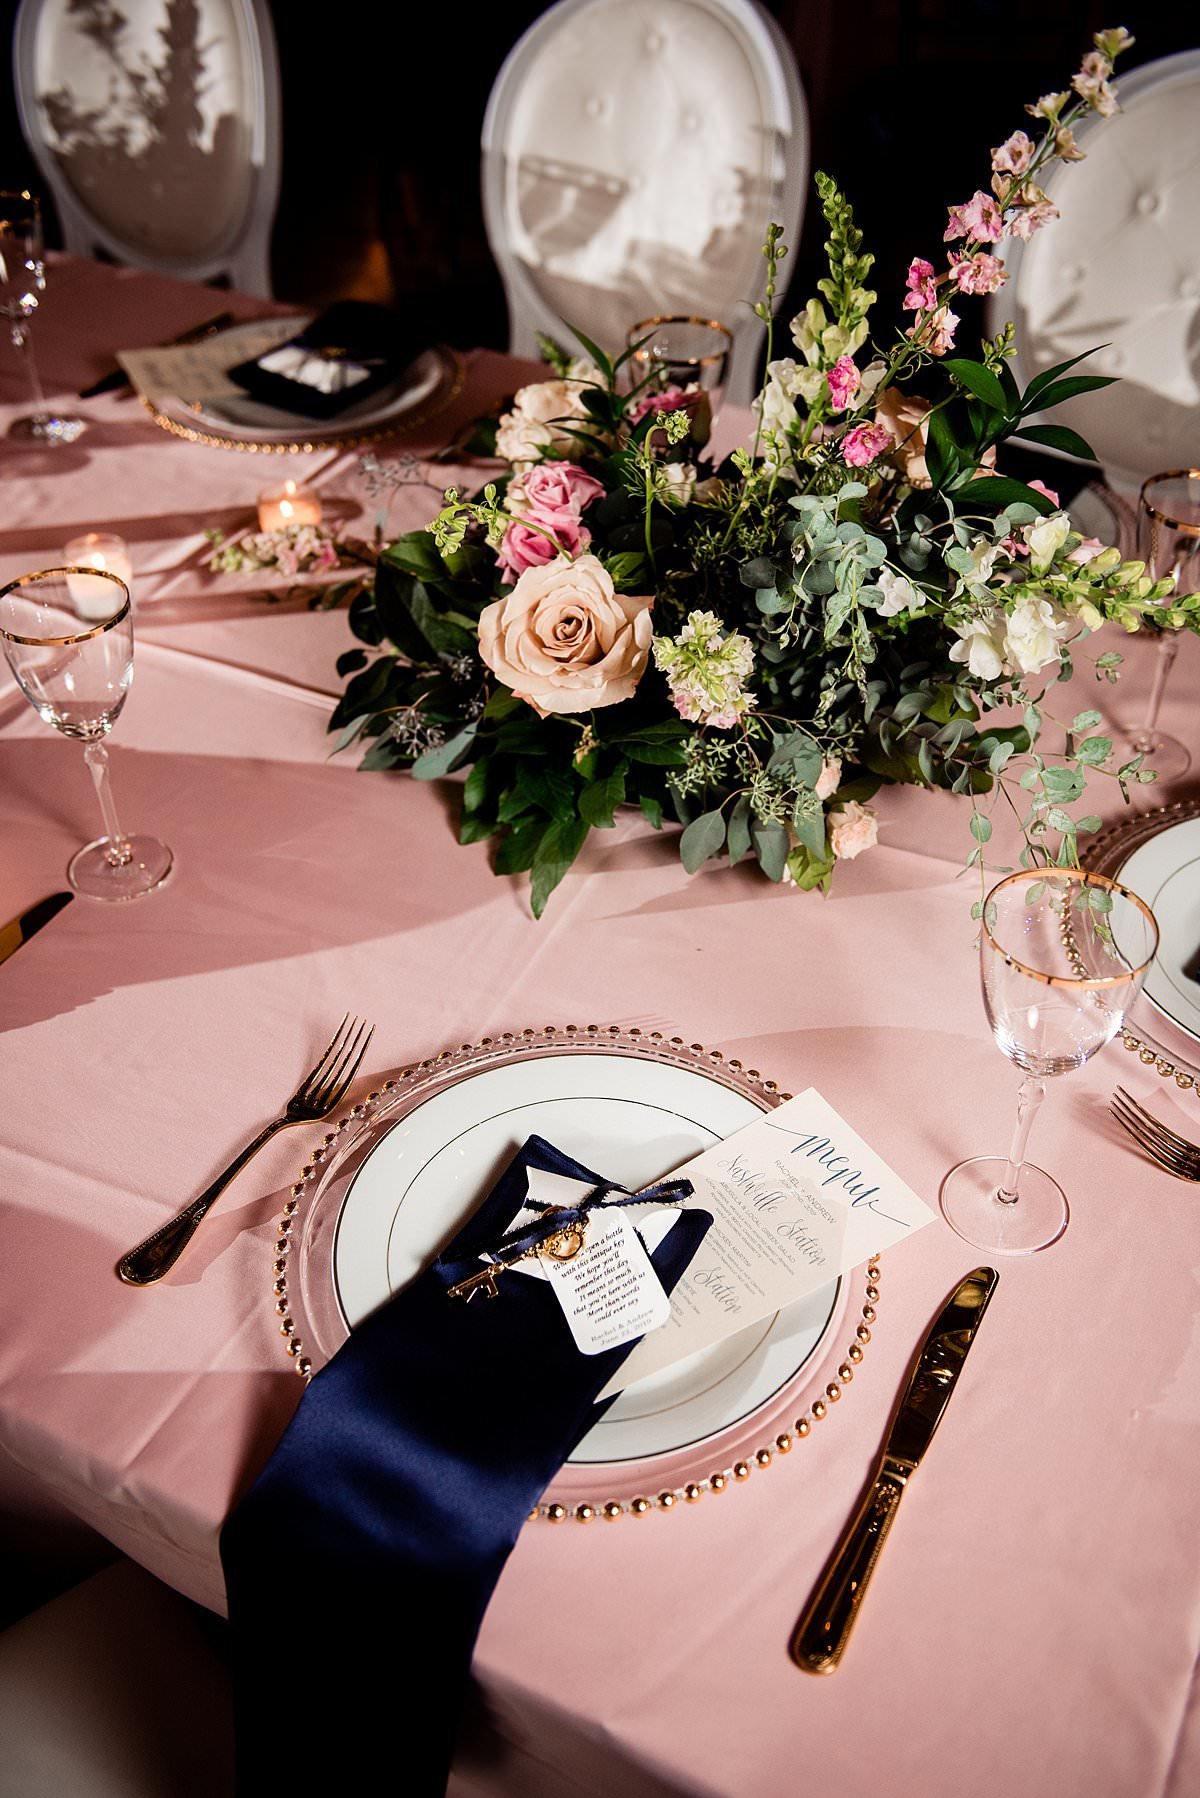 Glass chargers with gold detailing, clear dishes on top and navy napkins